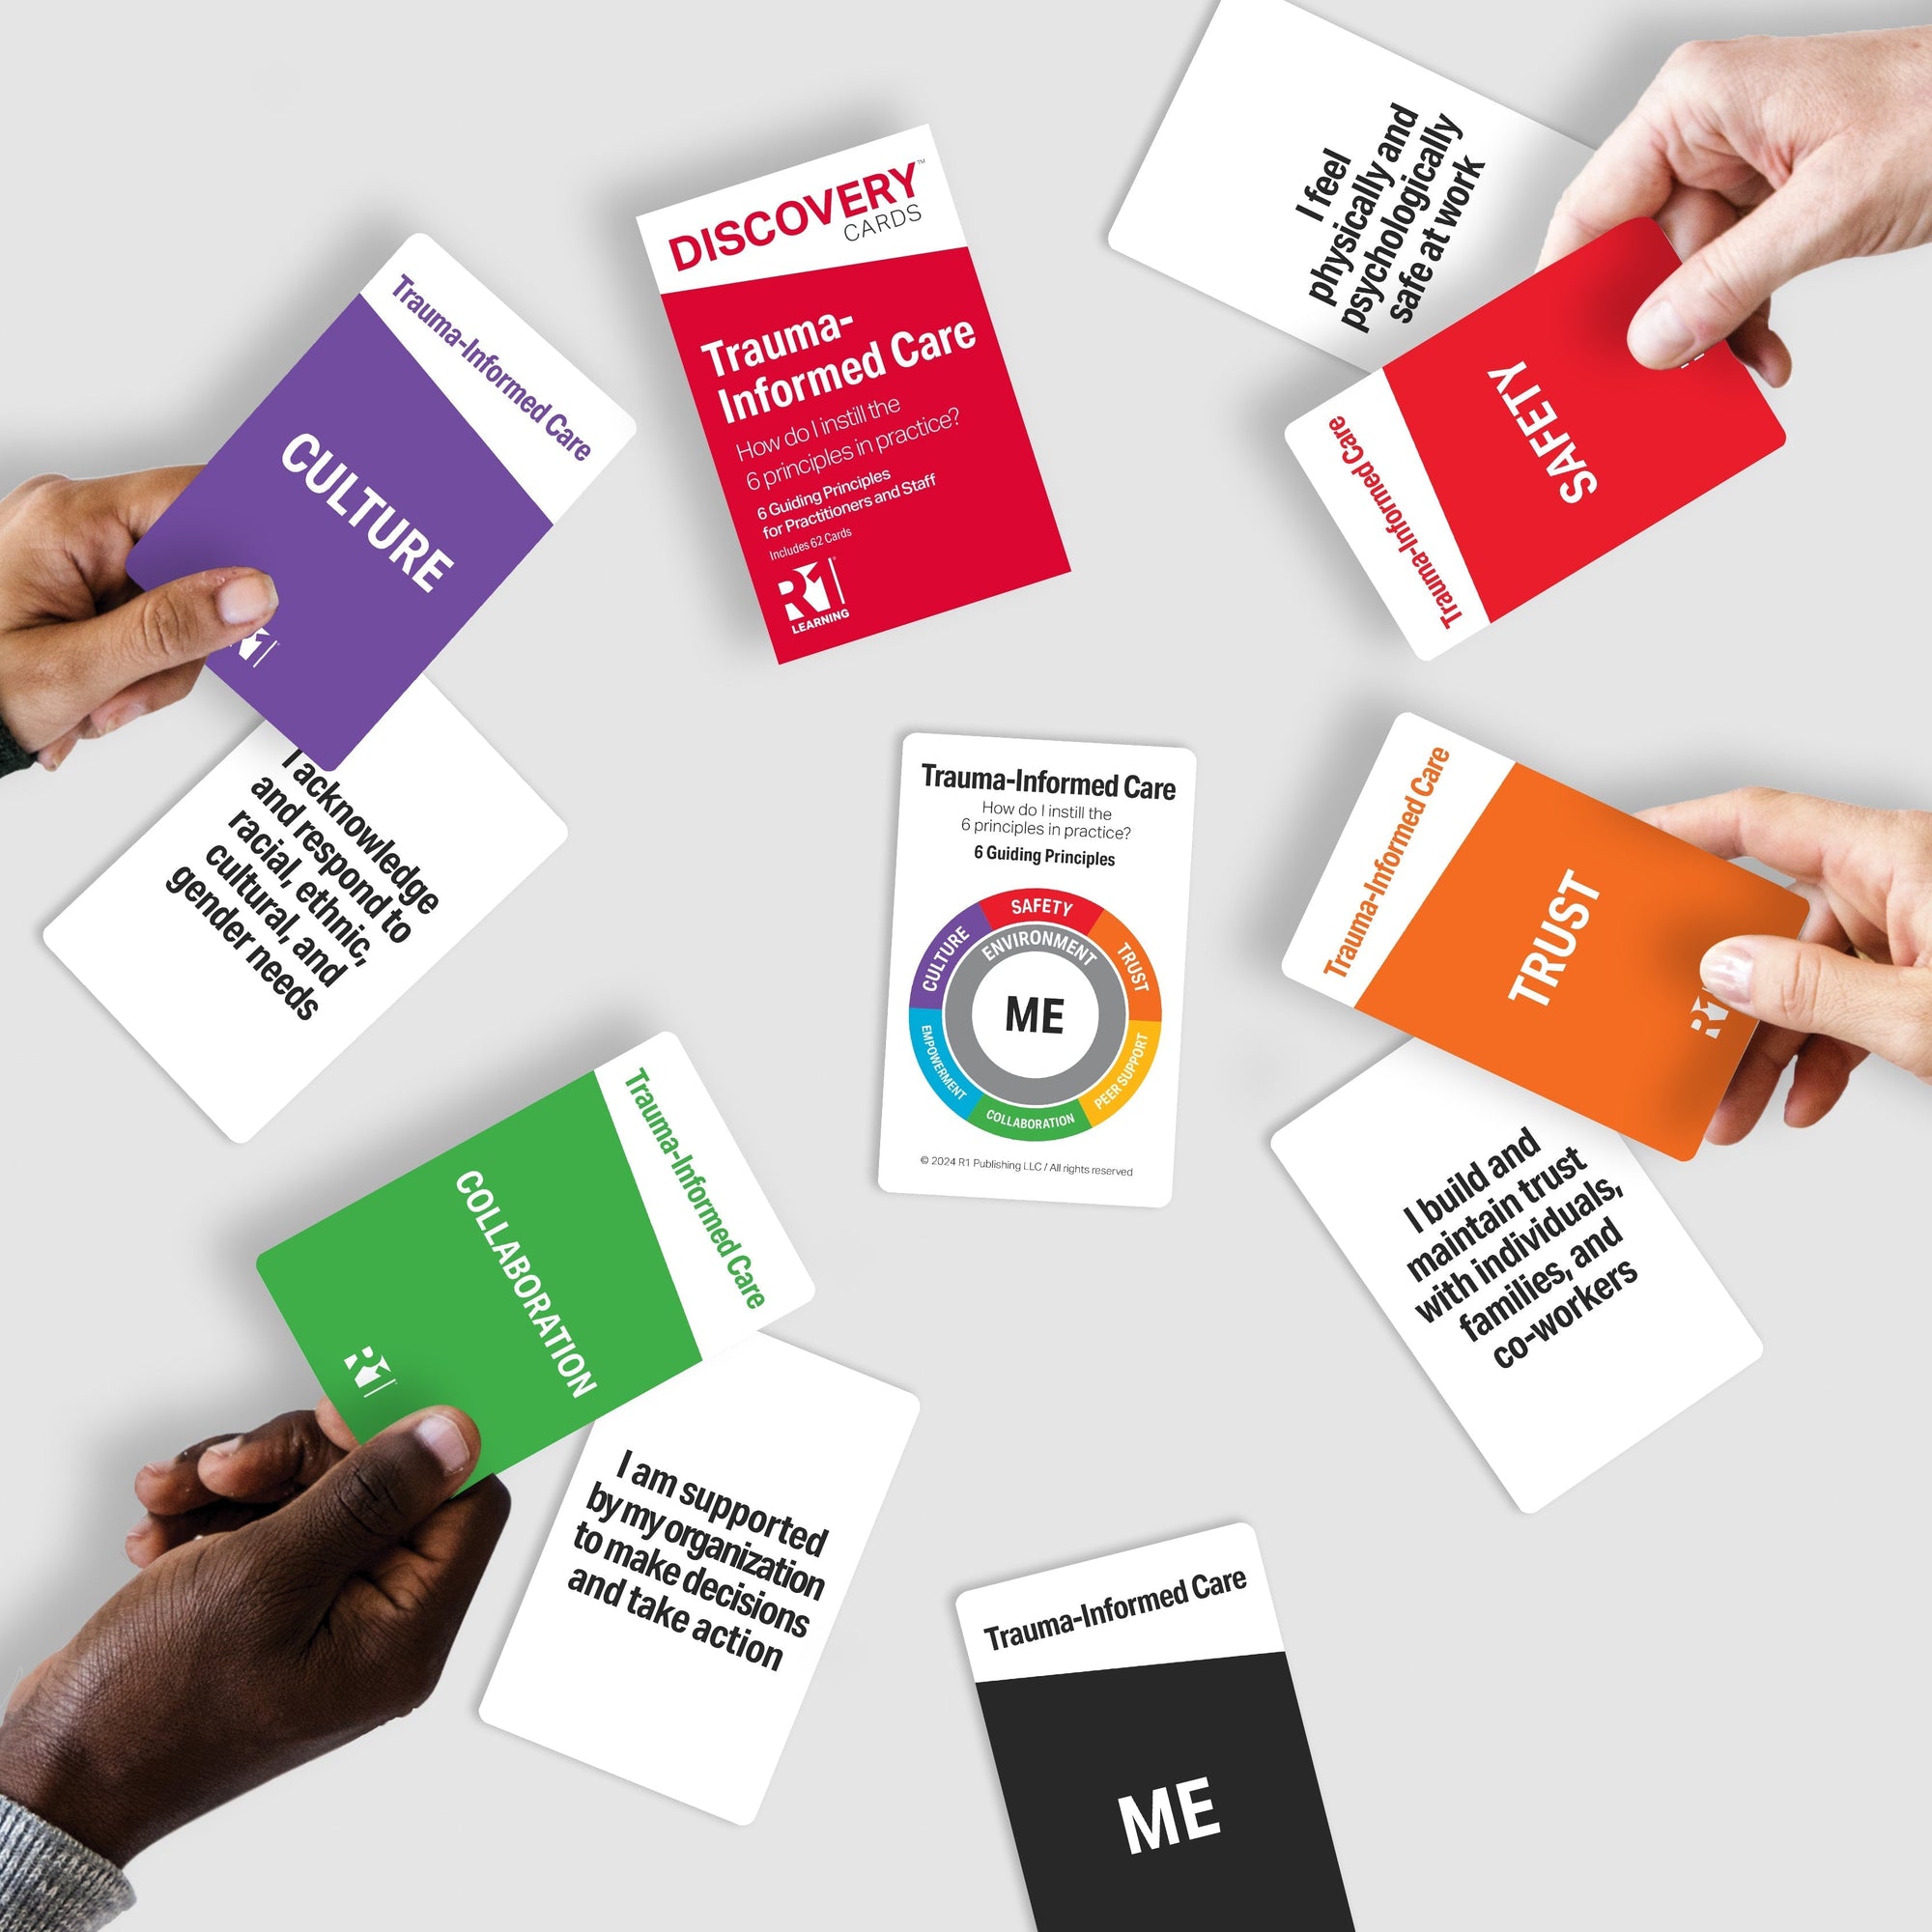 Trauma-Informed Care (ME) Cards Deck — 1 deck, for Practitioners and Staff